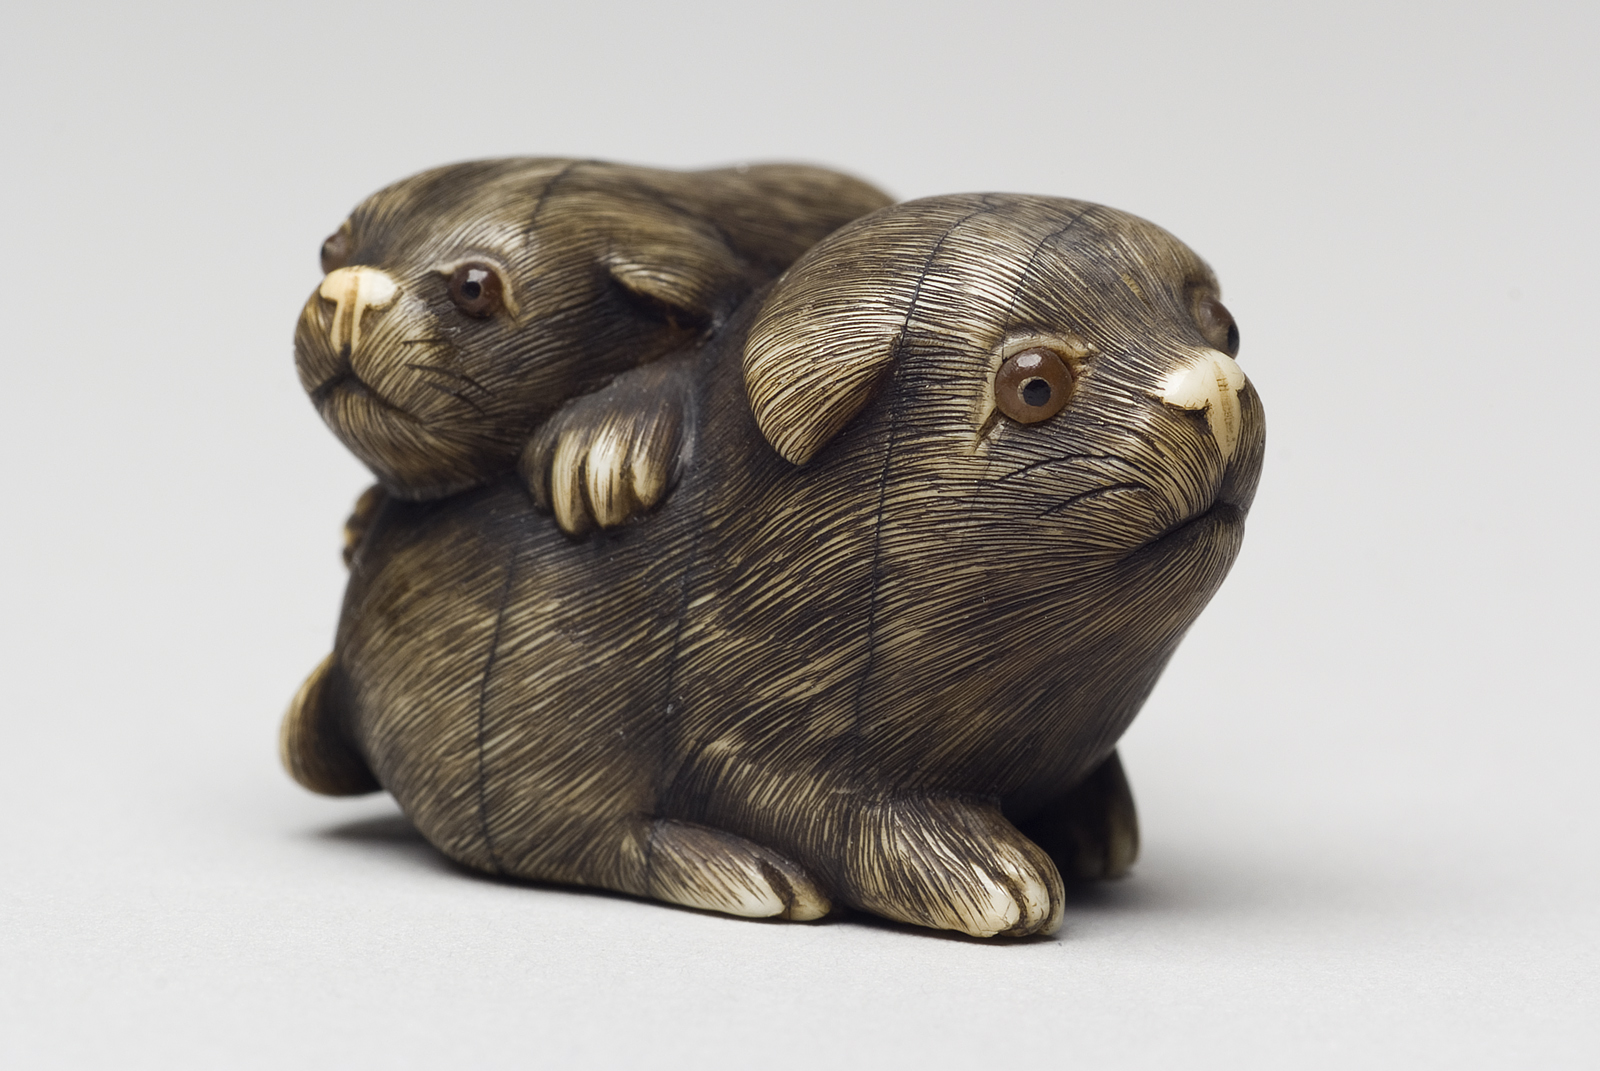 Japanese dog netsuke. Edo Period, possibly late 18th century. Bequeathed in 1928 by Miss Ann Reid. © Aberdeen City Council (Art Gallery and Museums Collections)